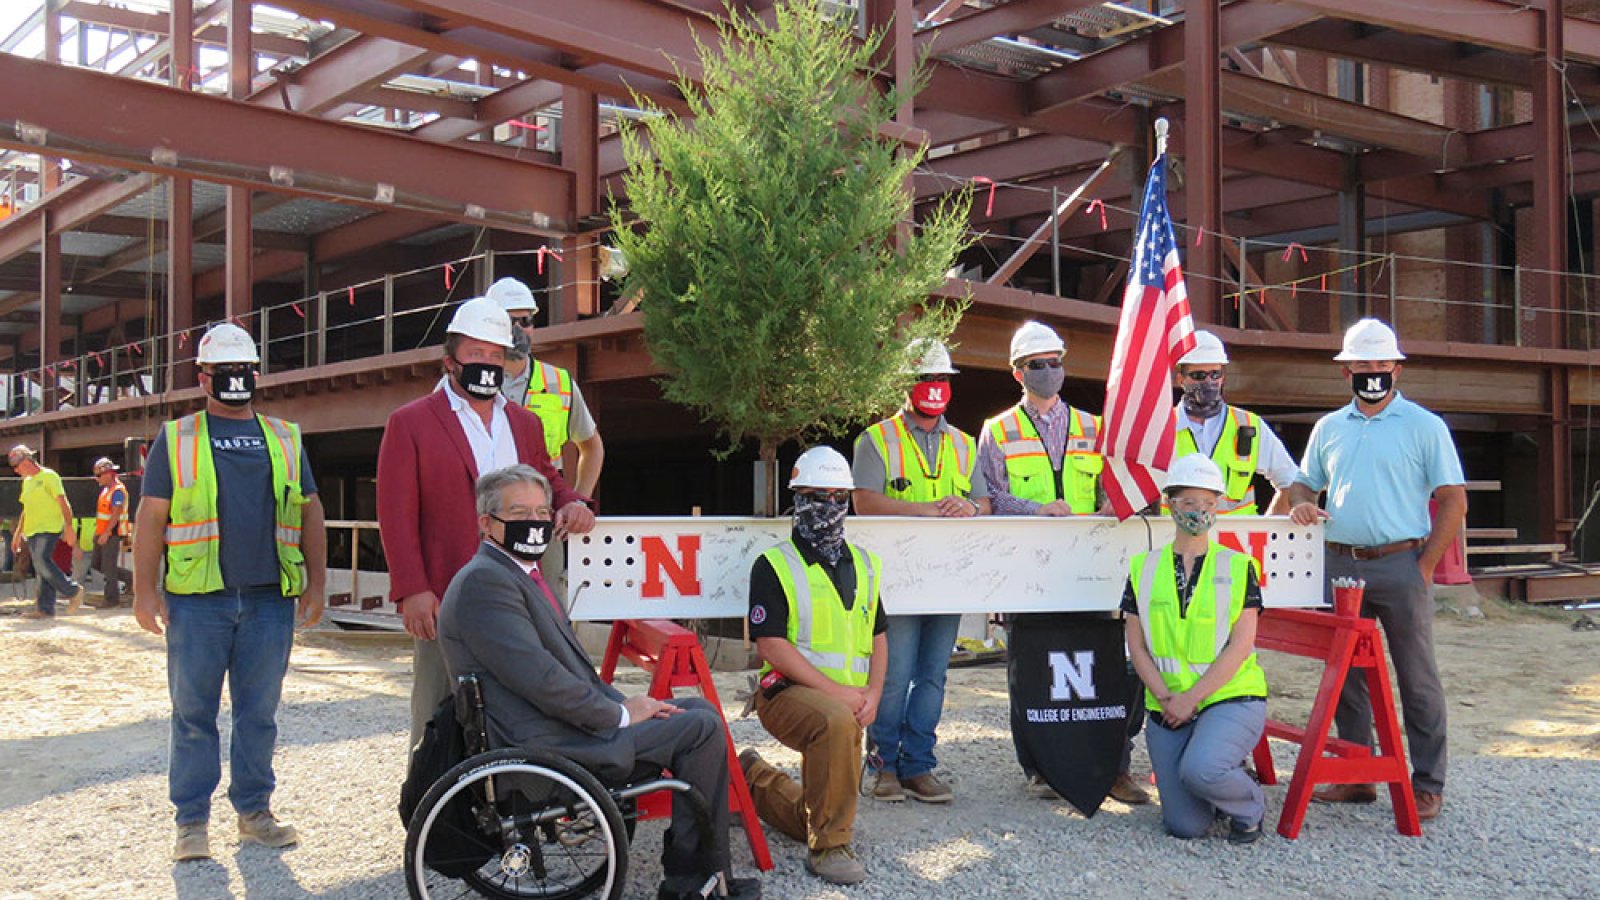 College of Engineering Dean Lance C. Pérez and representatives of Hausmann Construction were among the people who signed the final steel beam in the new Link before it was raised and put into place Wednesday, Aug. 26, 2020.